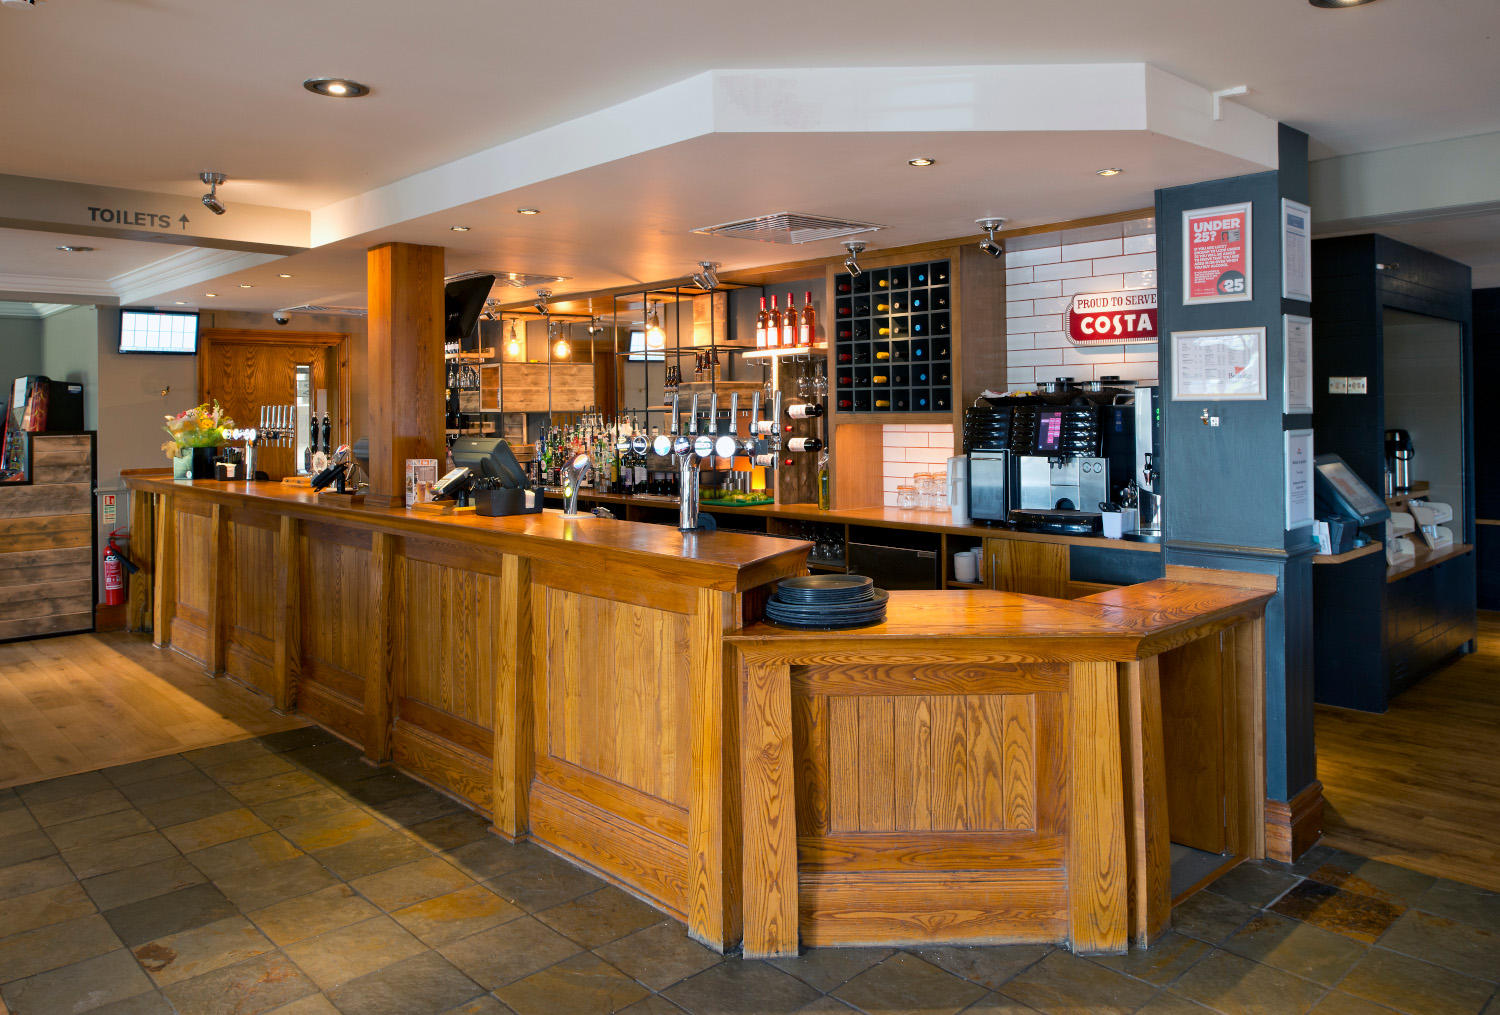 Beefeater restaurant interior Premier Inn Frome hotel Frome 03337 777269